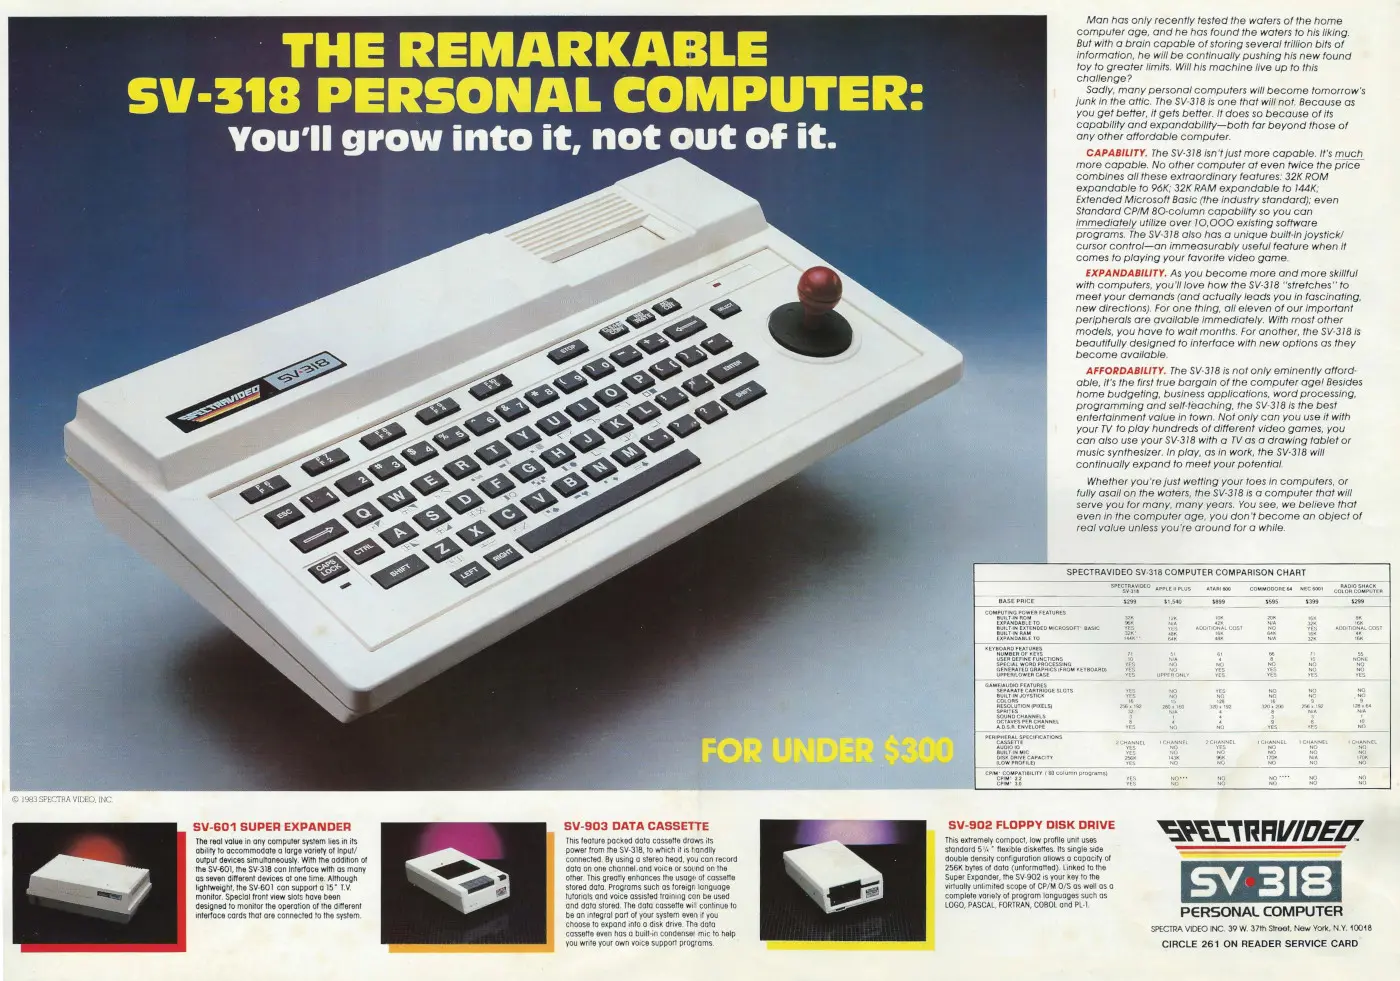 Spectravideo Advert: The Remarkable SV-318 Personal Computer, from Creative Computing, August 1983